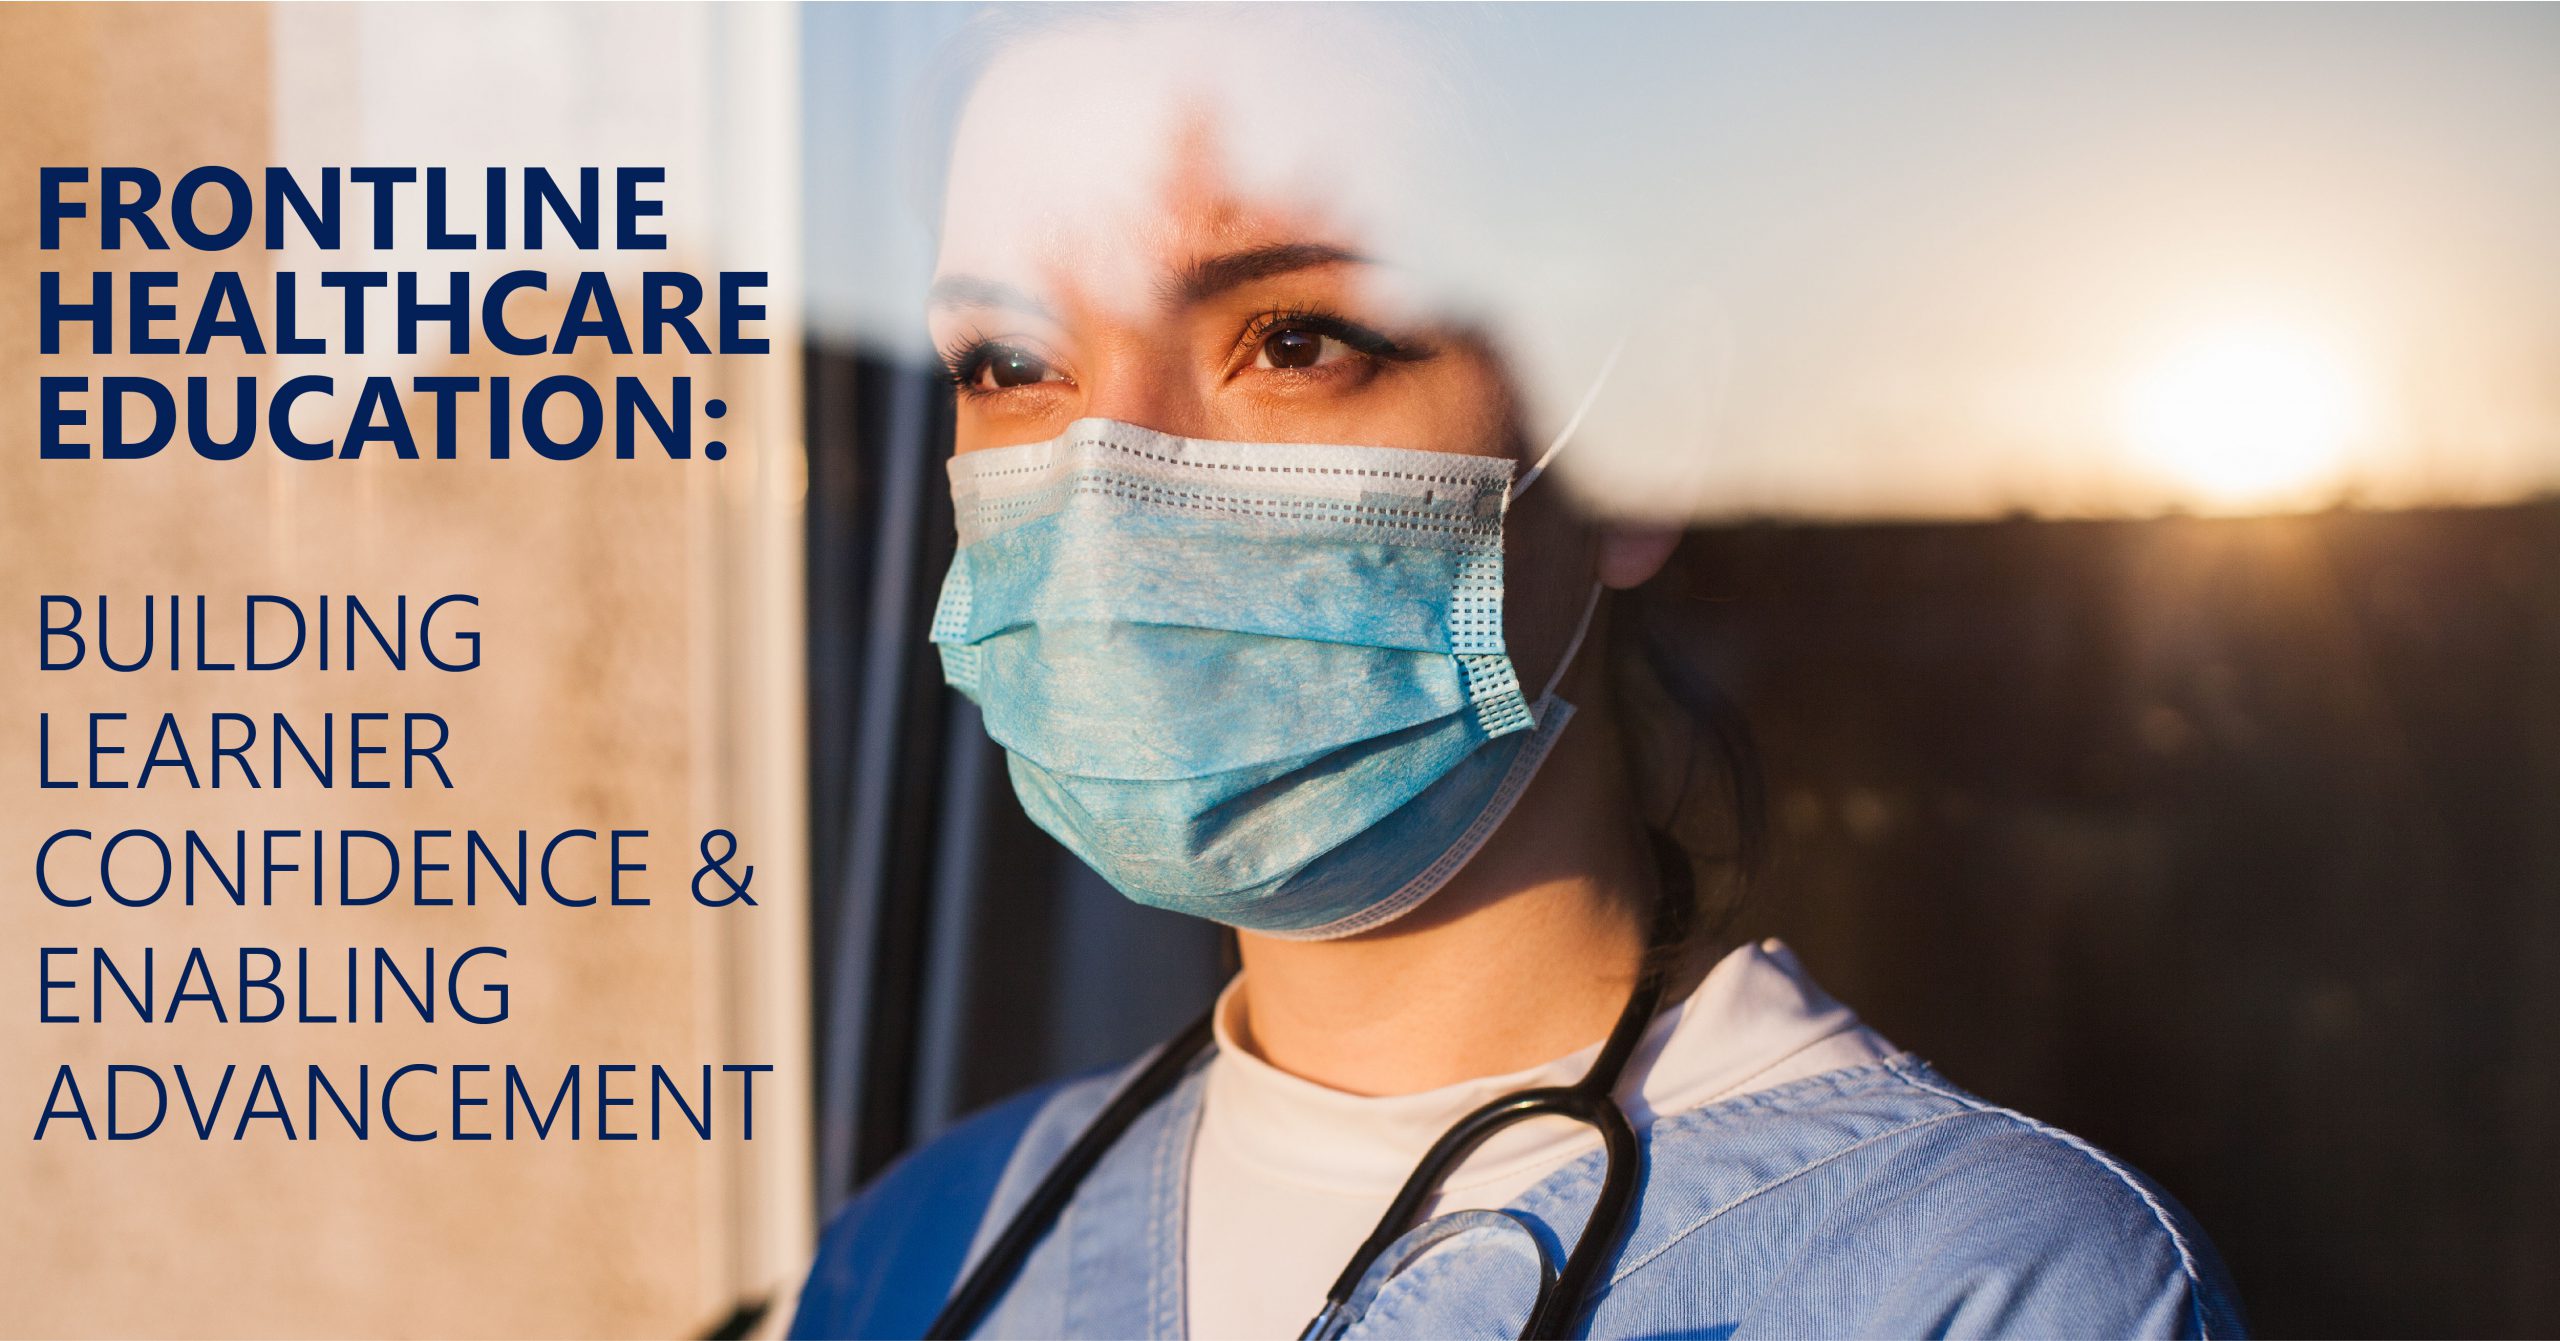 Young woman healthcare worker wearing mask looks pensively out a window onto a bright landscape. Title of article "Frontline Healthcare Education: Building Learner Confidence & Enabling Advancement" is superimposed on the left side of the image.